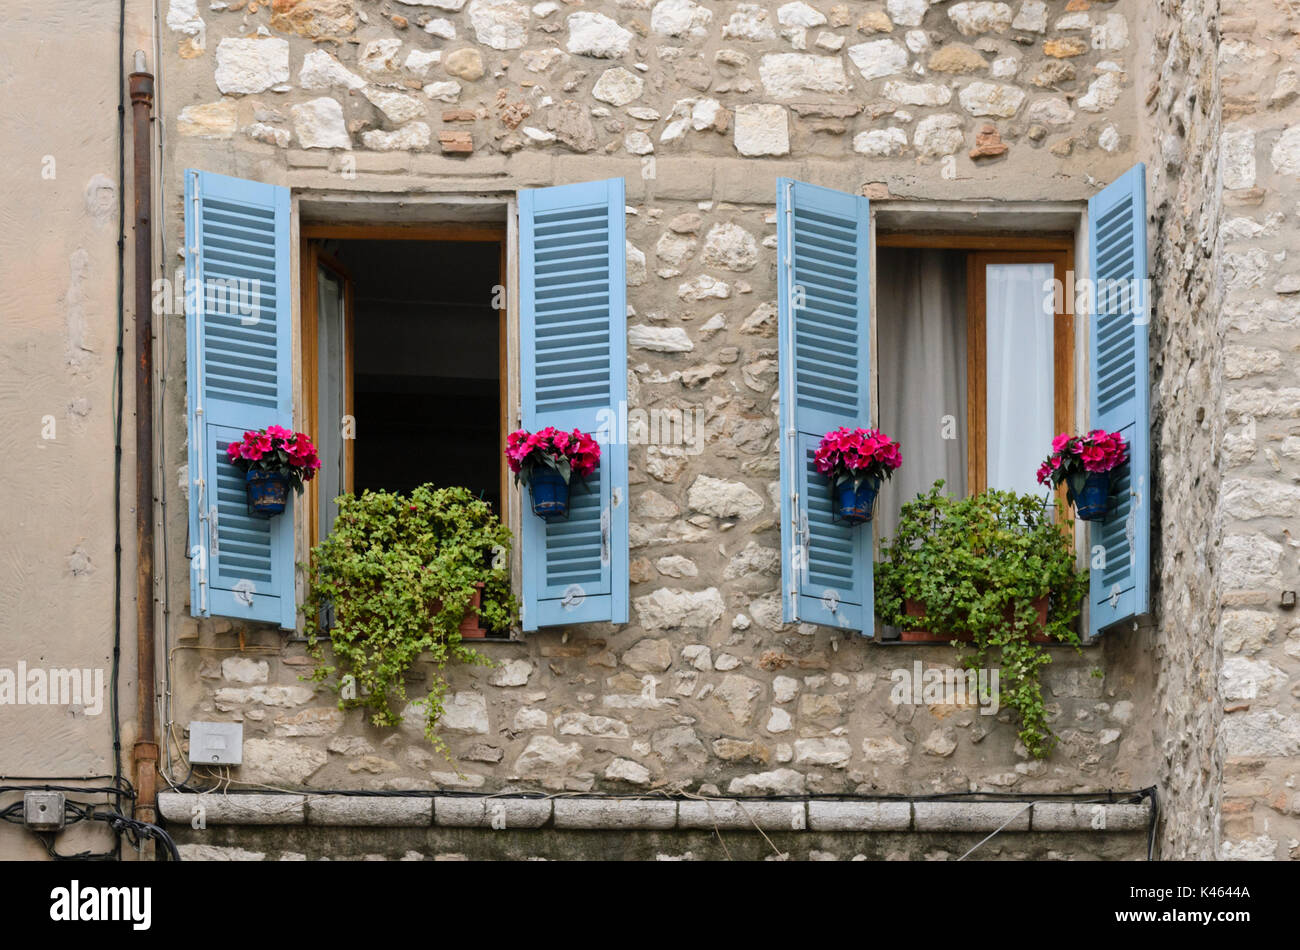 Old town house with flower pots, Vence, France Stock Photo